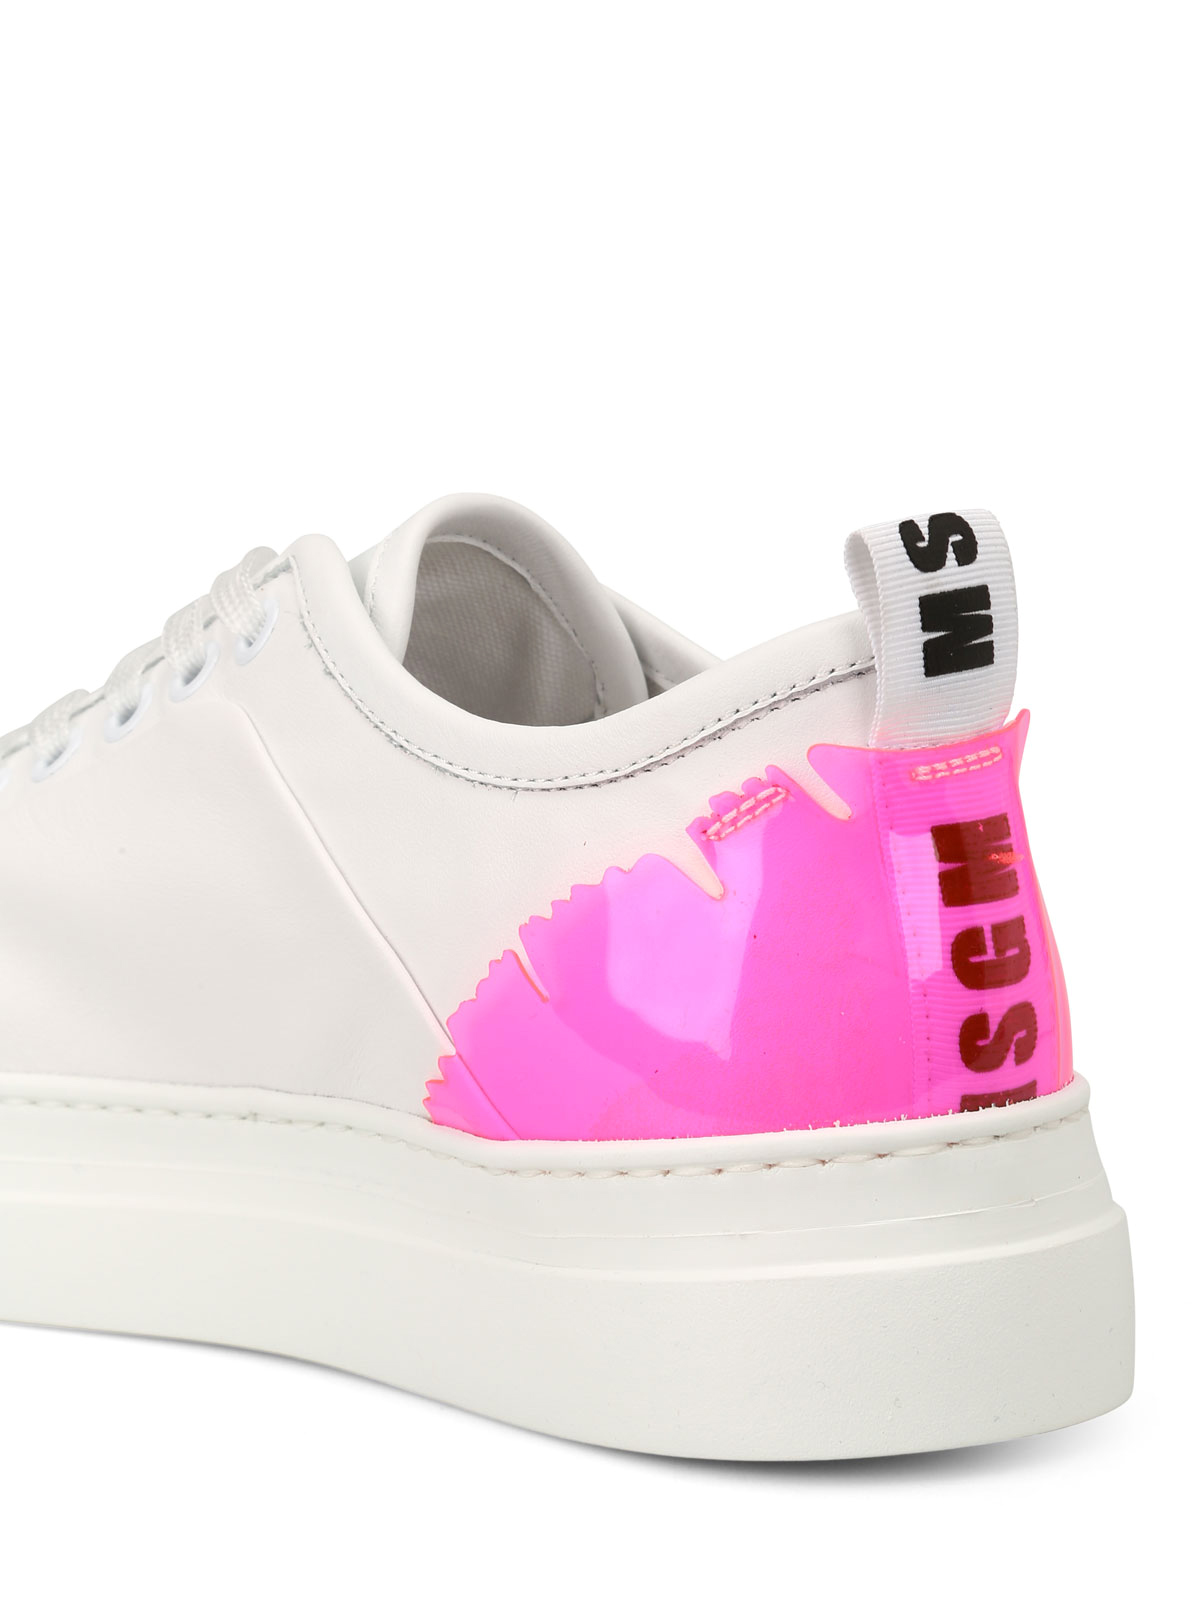 sneakers rosa fluo